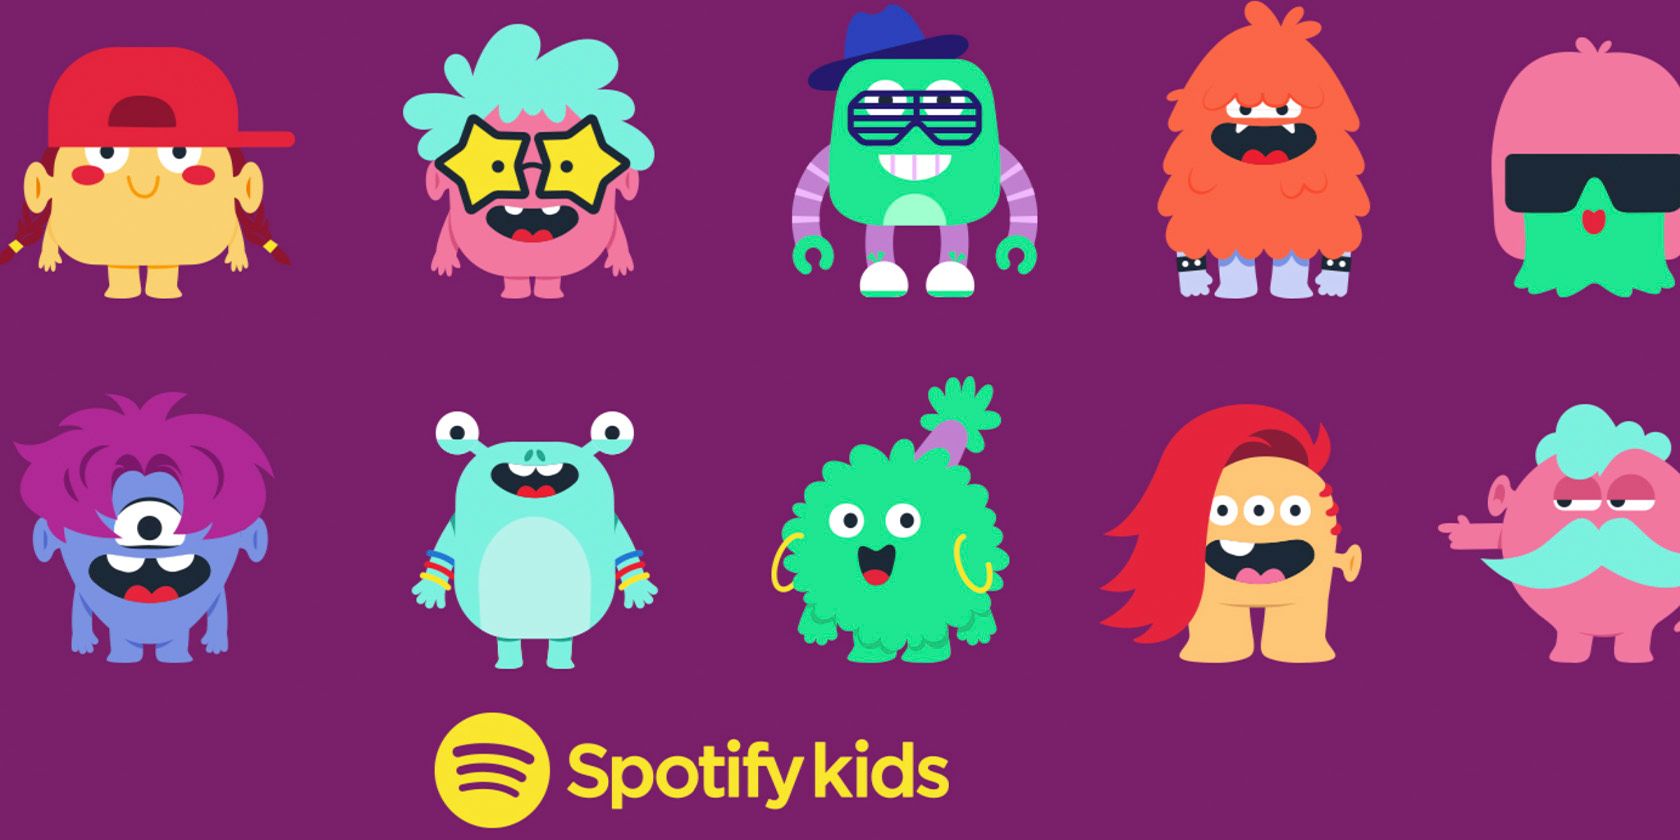 SpotifyKids How to Share